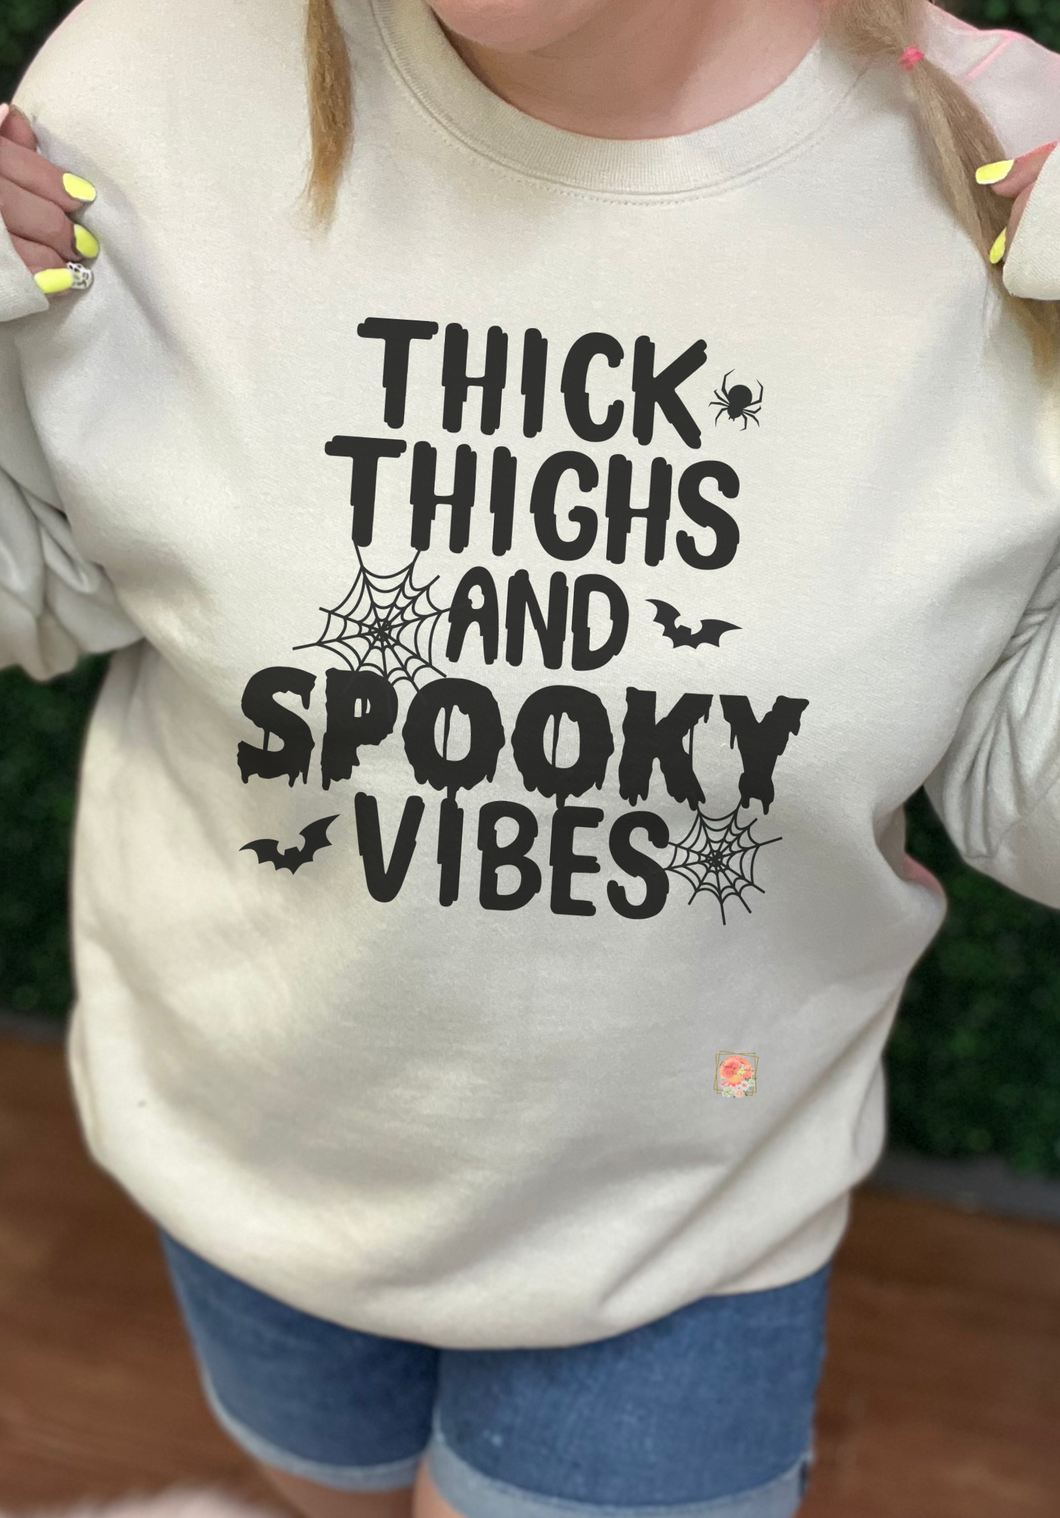 Thick thighs spooky vibes